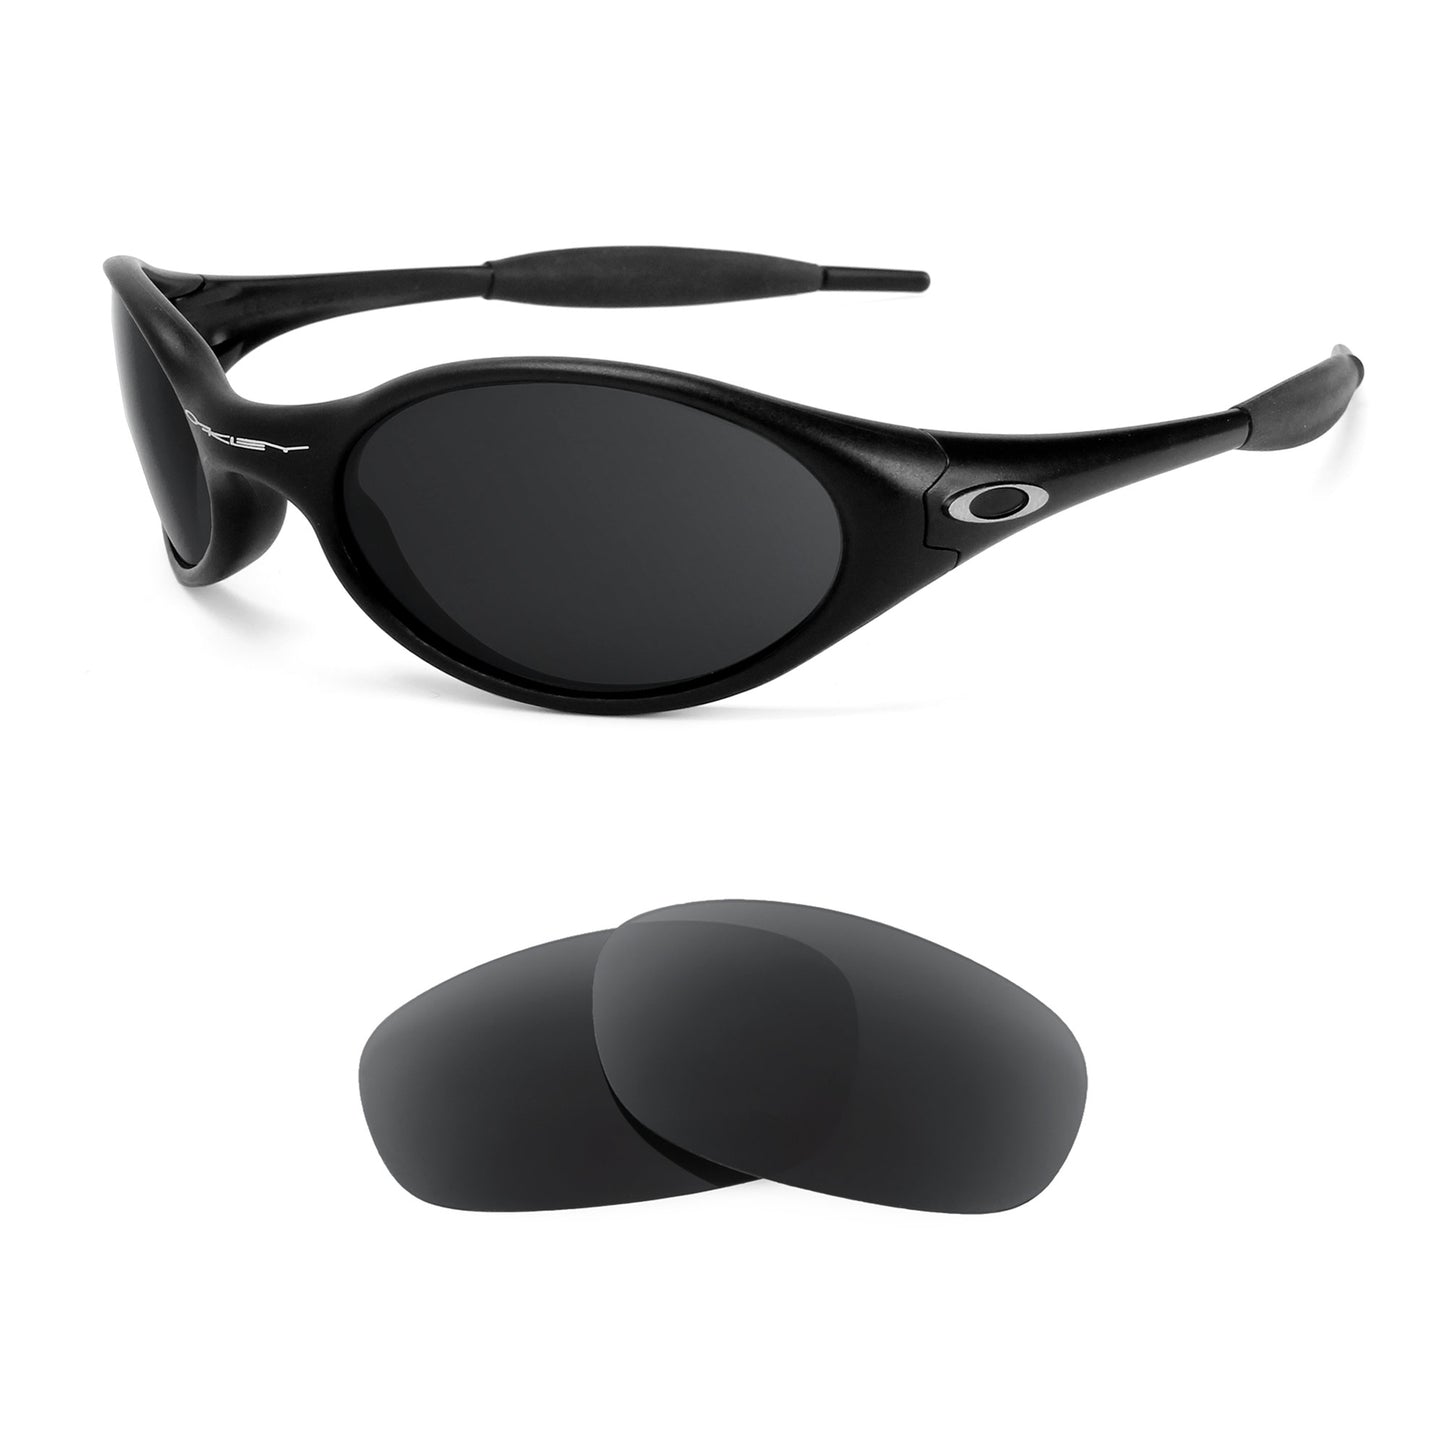 Oakley Eye Jacket 1.0 sunglasses with replacement lenses